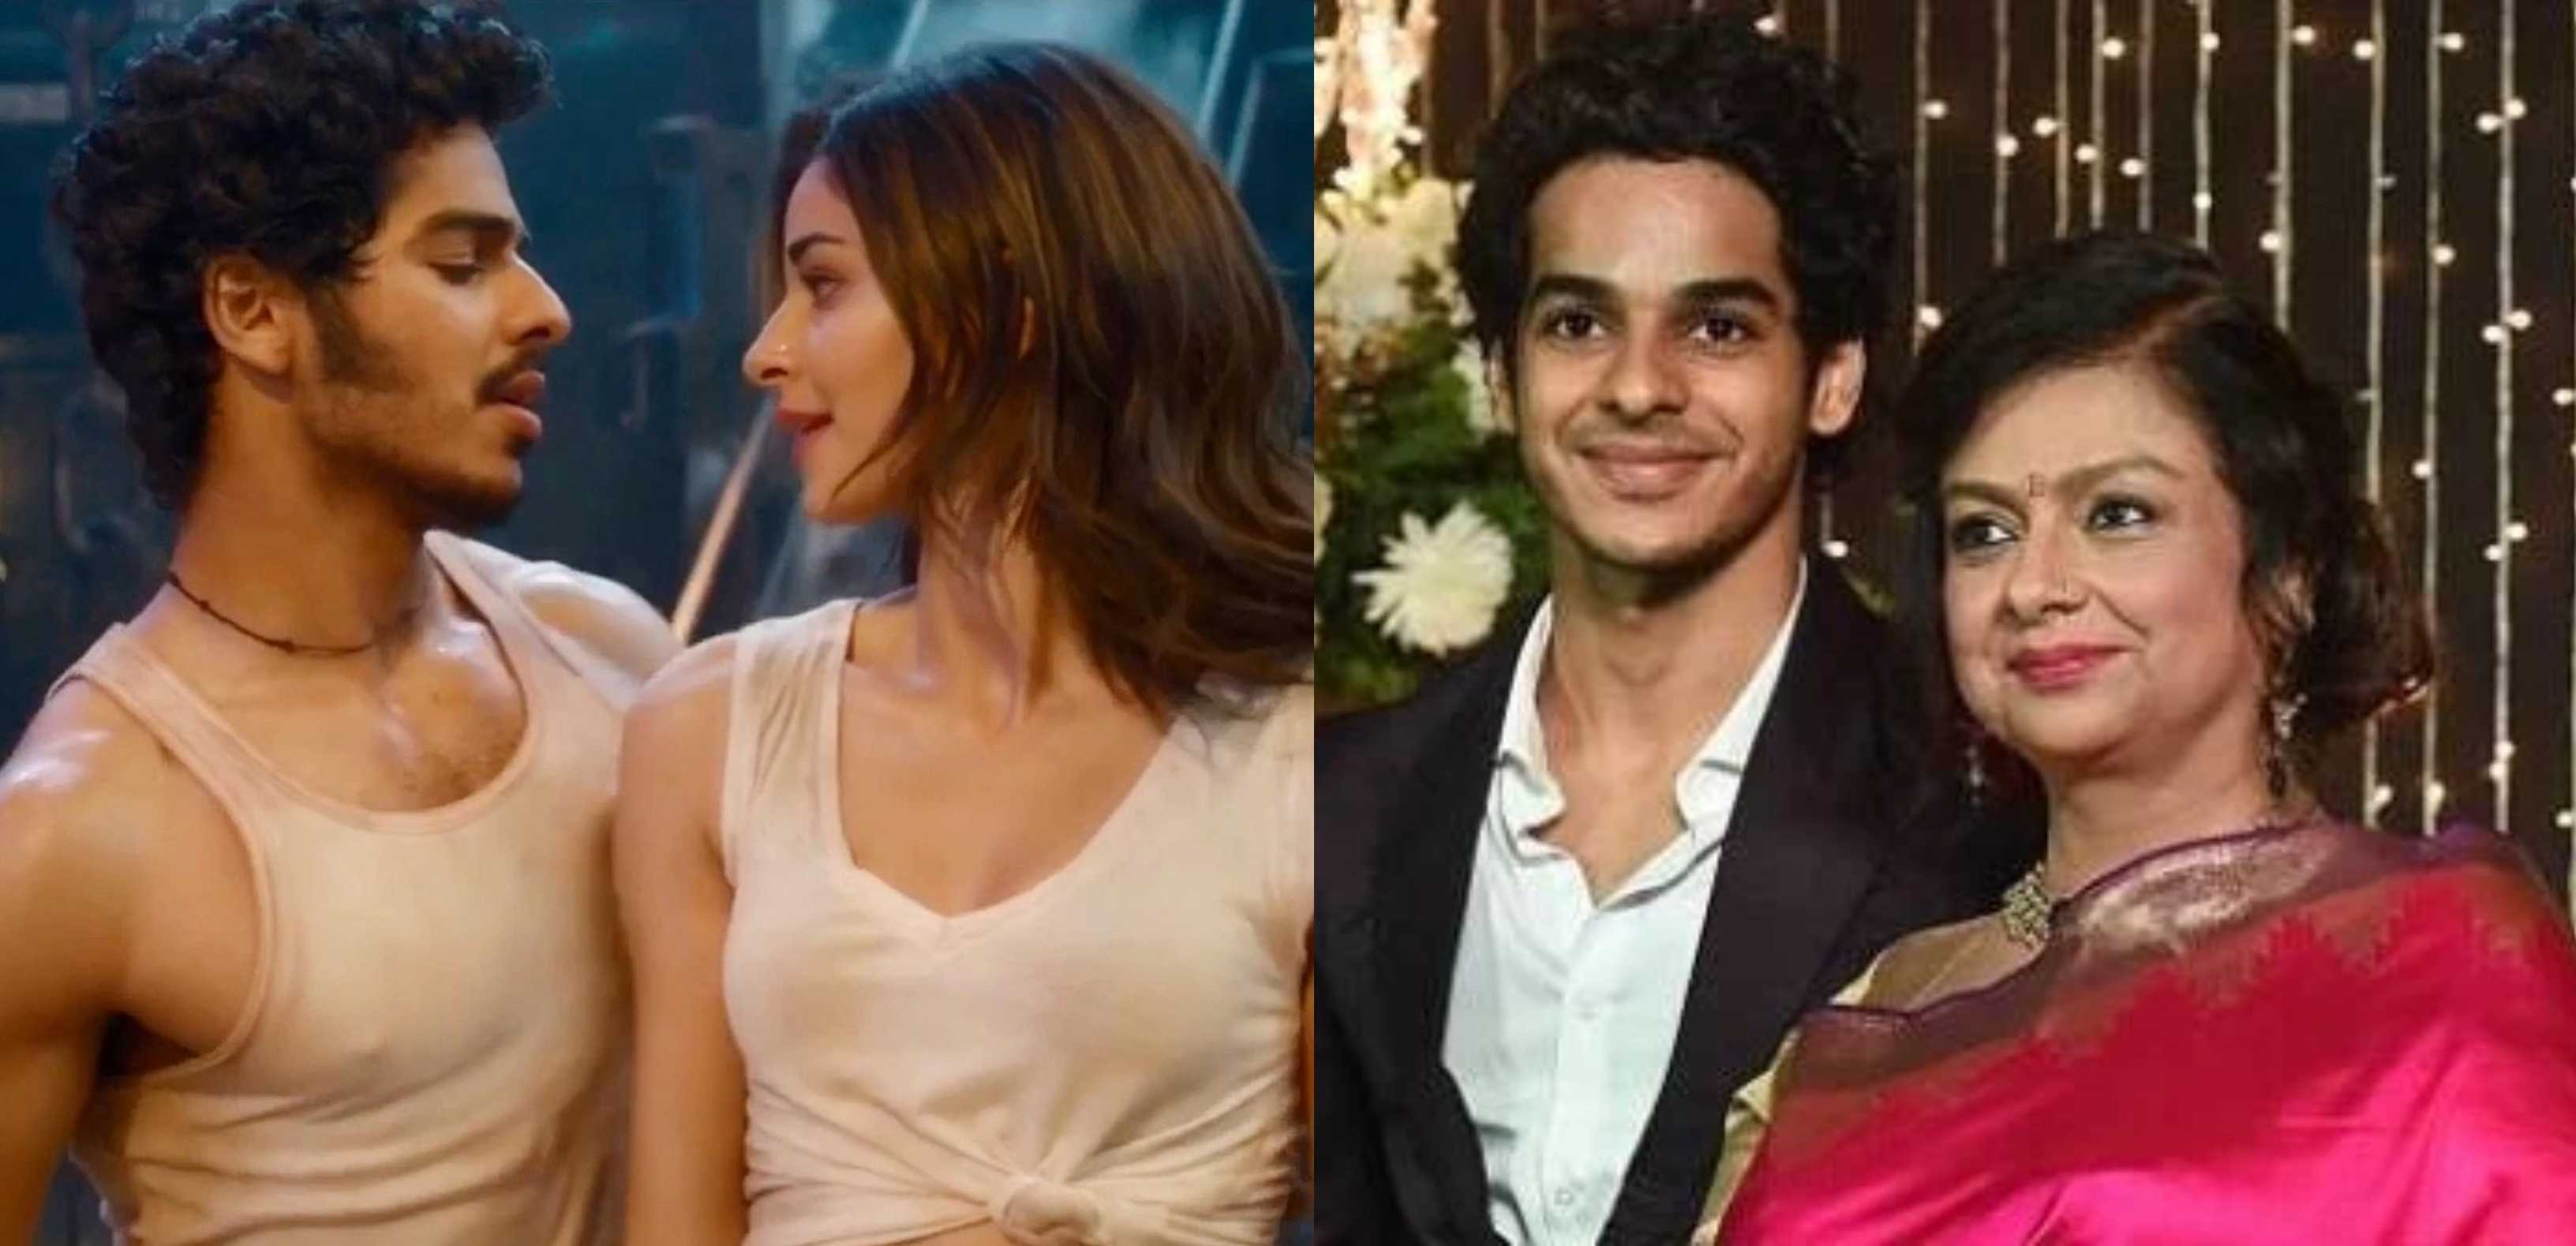 Ishaan Khatter’s mother Neelima Azim on his rumored GF Ananya Panday: ‘She’s an important part of his life’